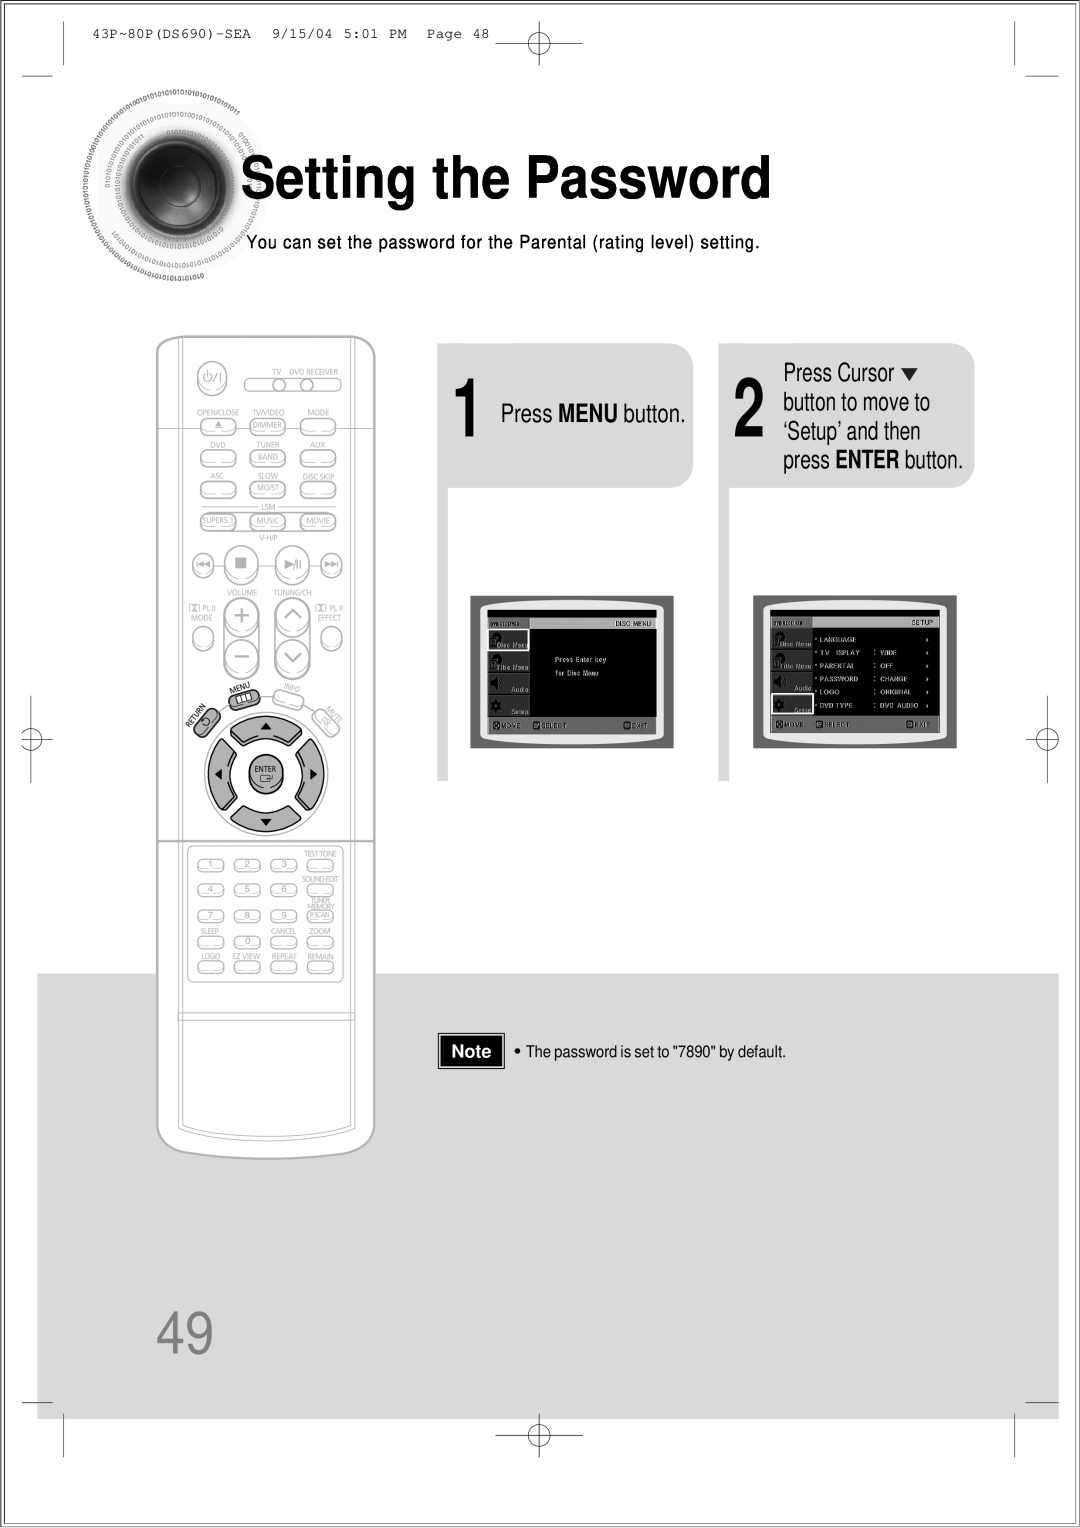 Samsung HT-DS690 instruction manual Setting the Password, 1 2 button to move to Press MENU button, Press Cursor 